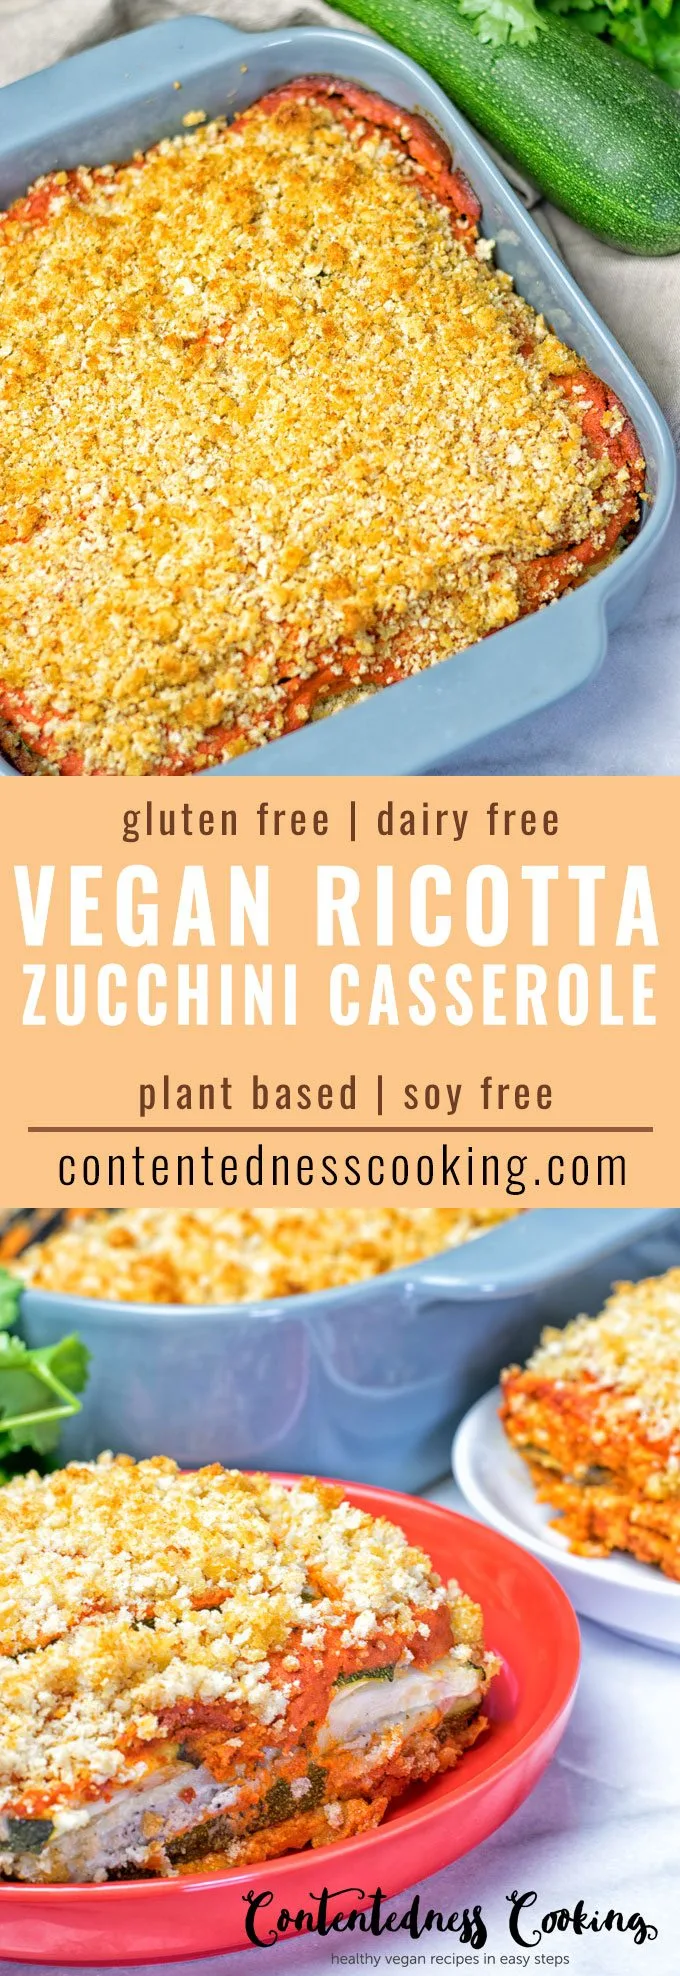 Collage of two pictures of the Vegan Ricotta Zucchini Casserole with recipe title text.